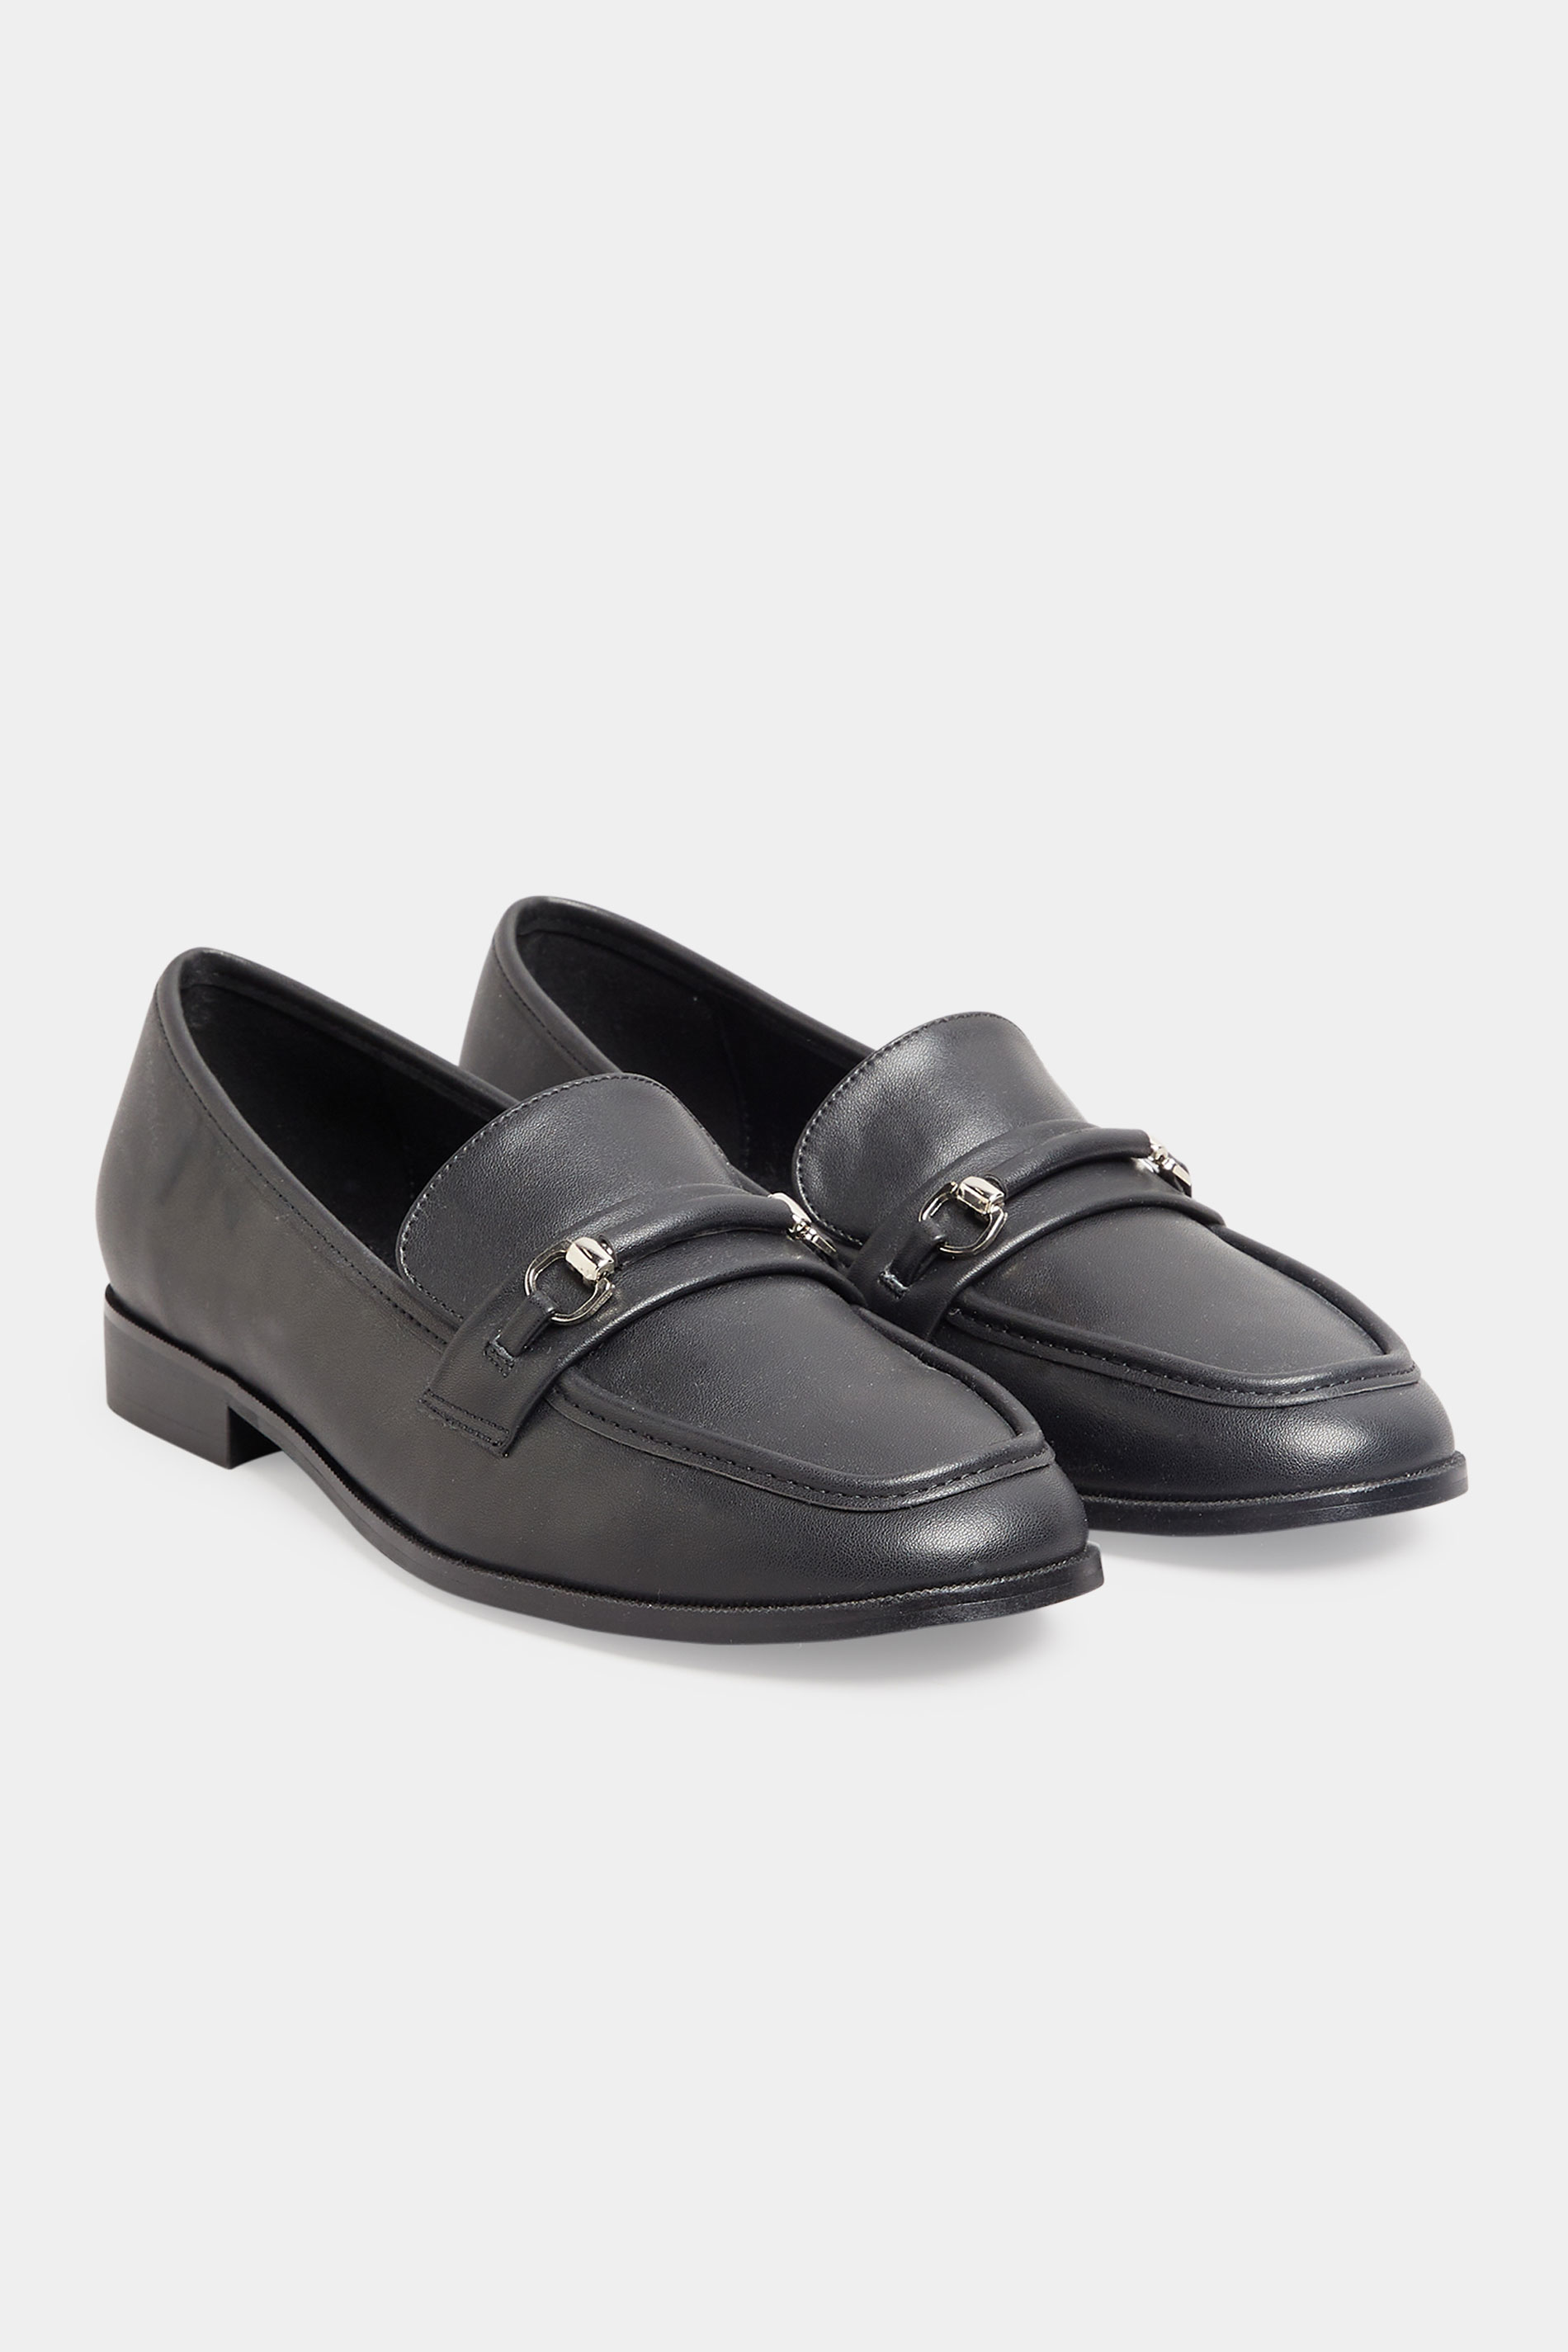 LTS Black Saddle Loafers In Standard Fit | Long Tall Sally